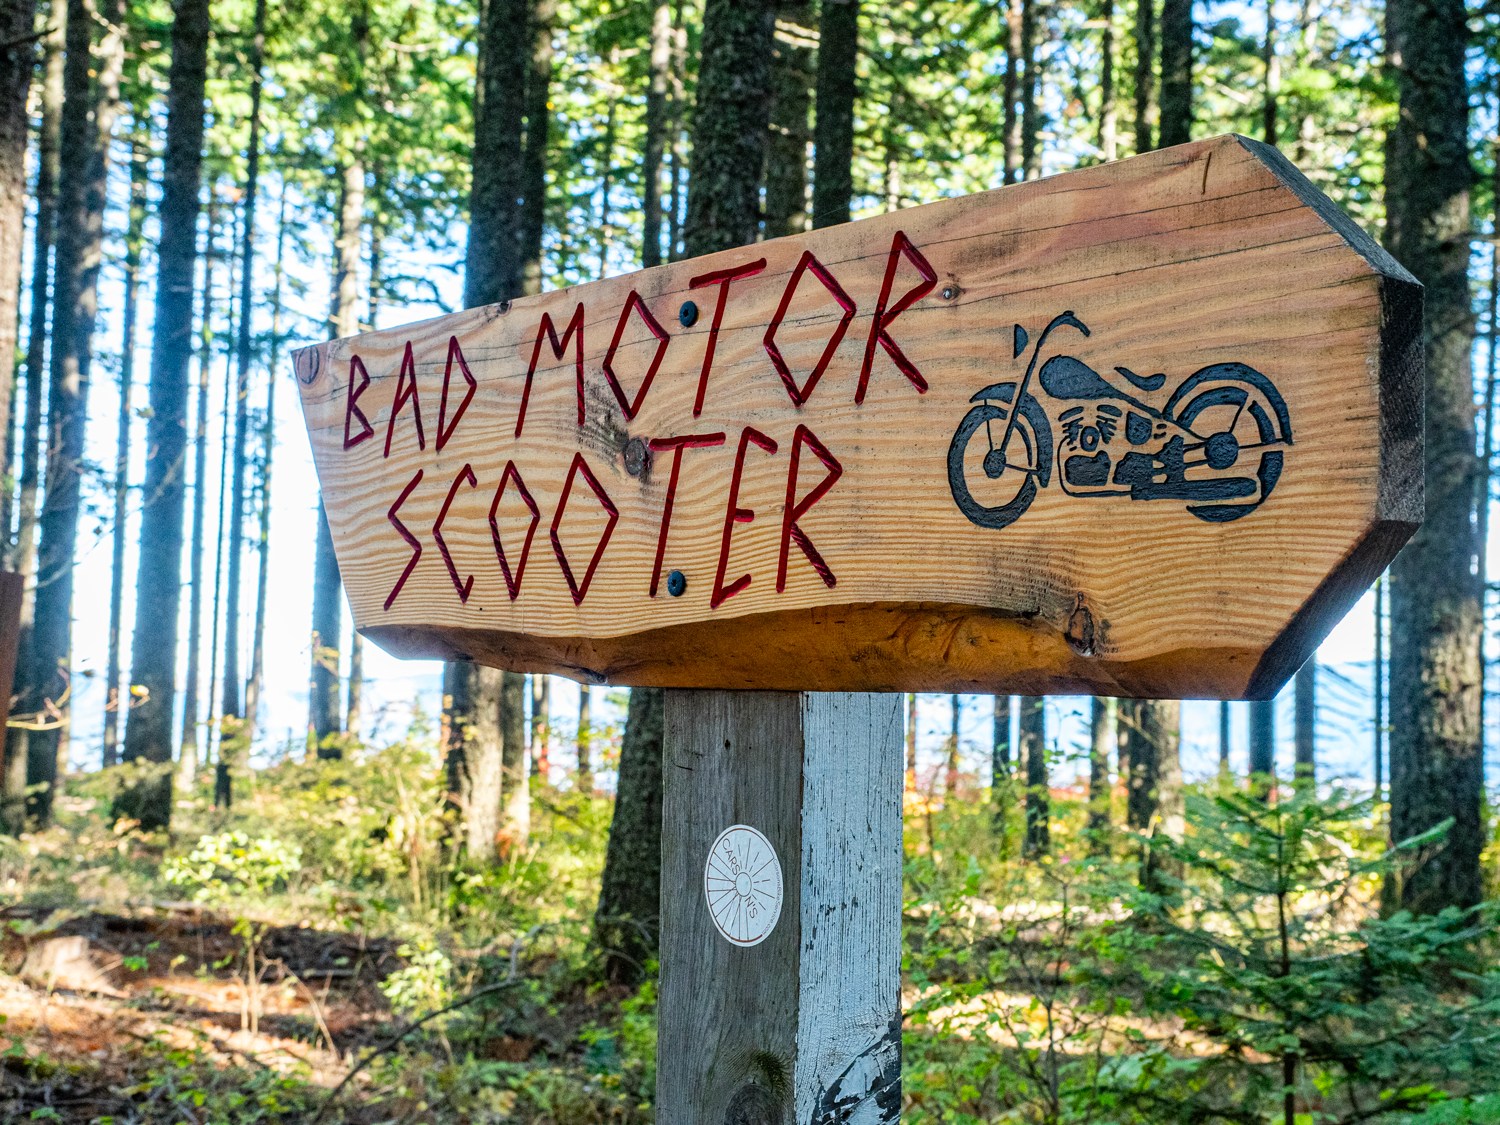 Bad Motor Scooter Sign